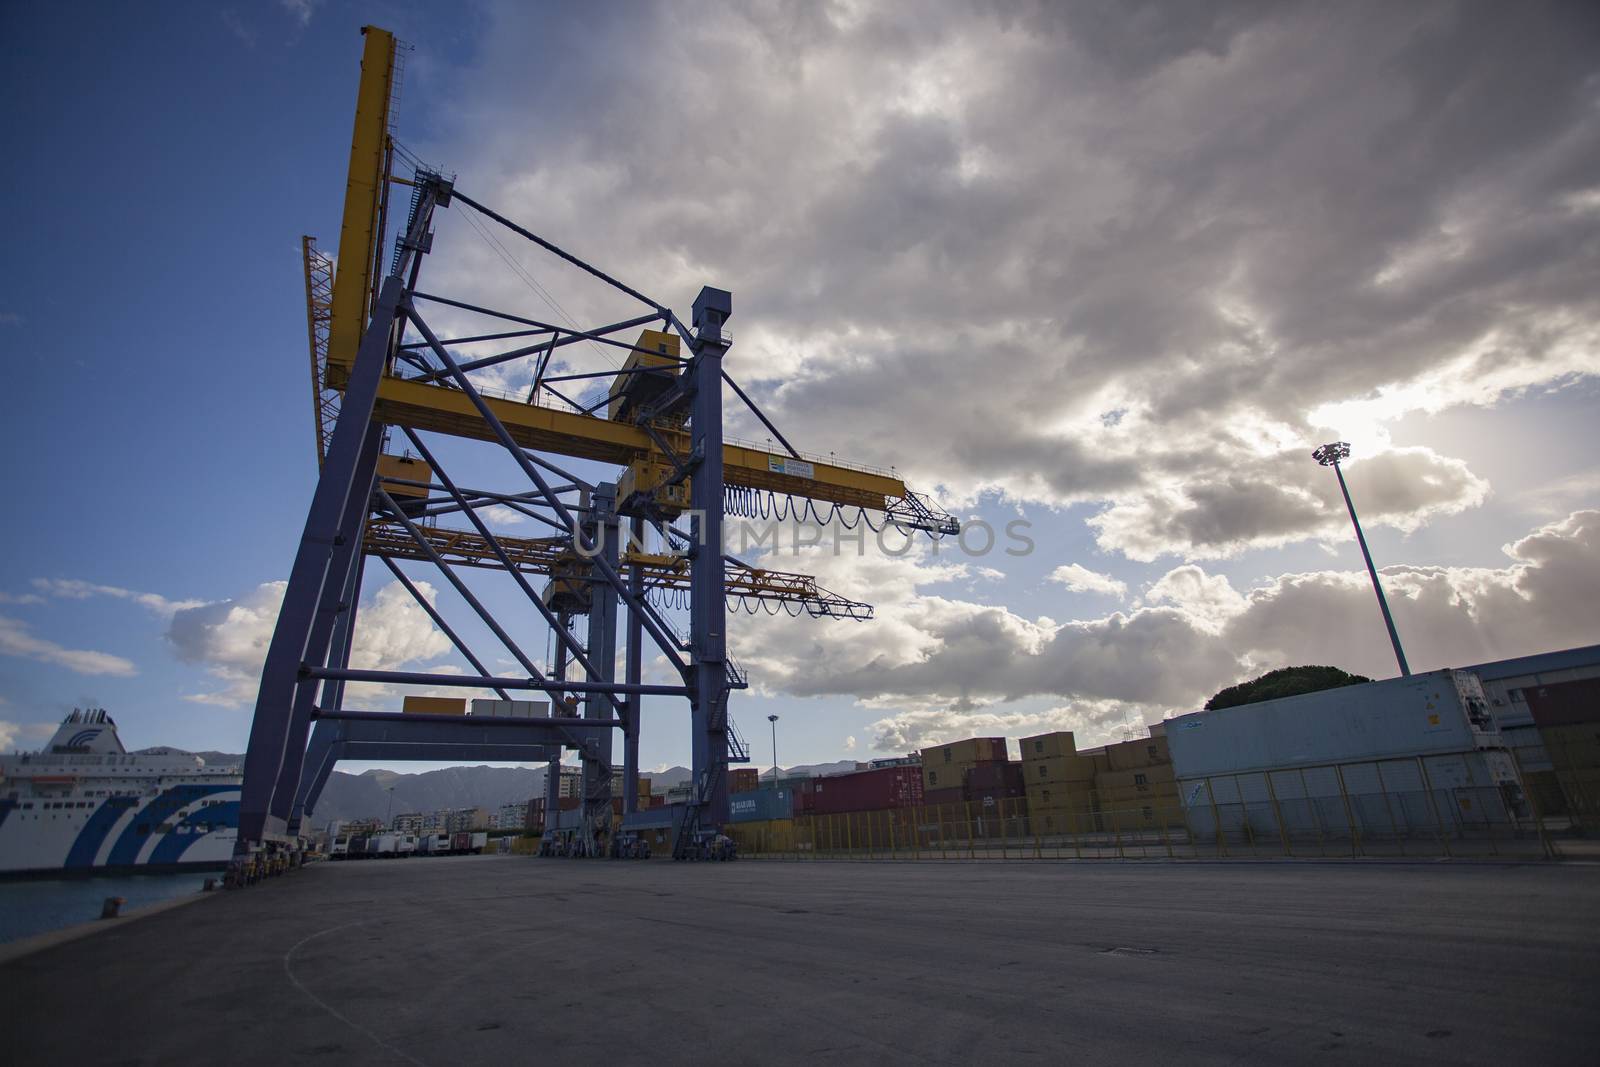 Cranes at the port of Palermo for handling cargo loads